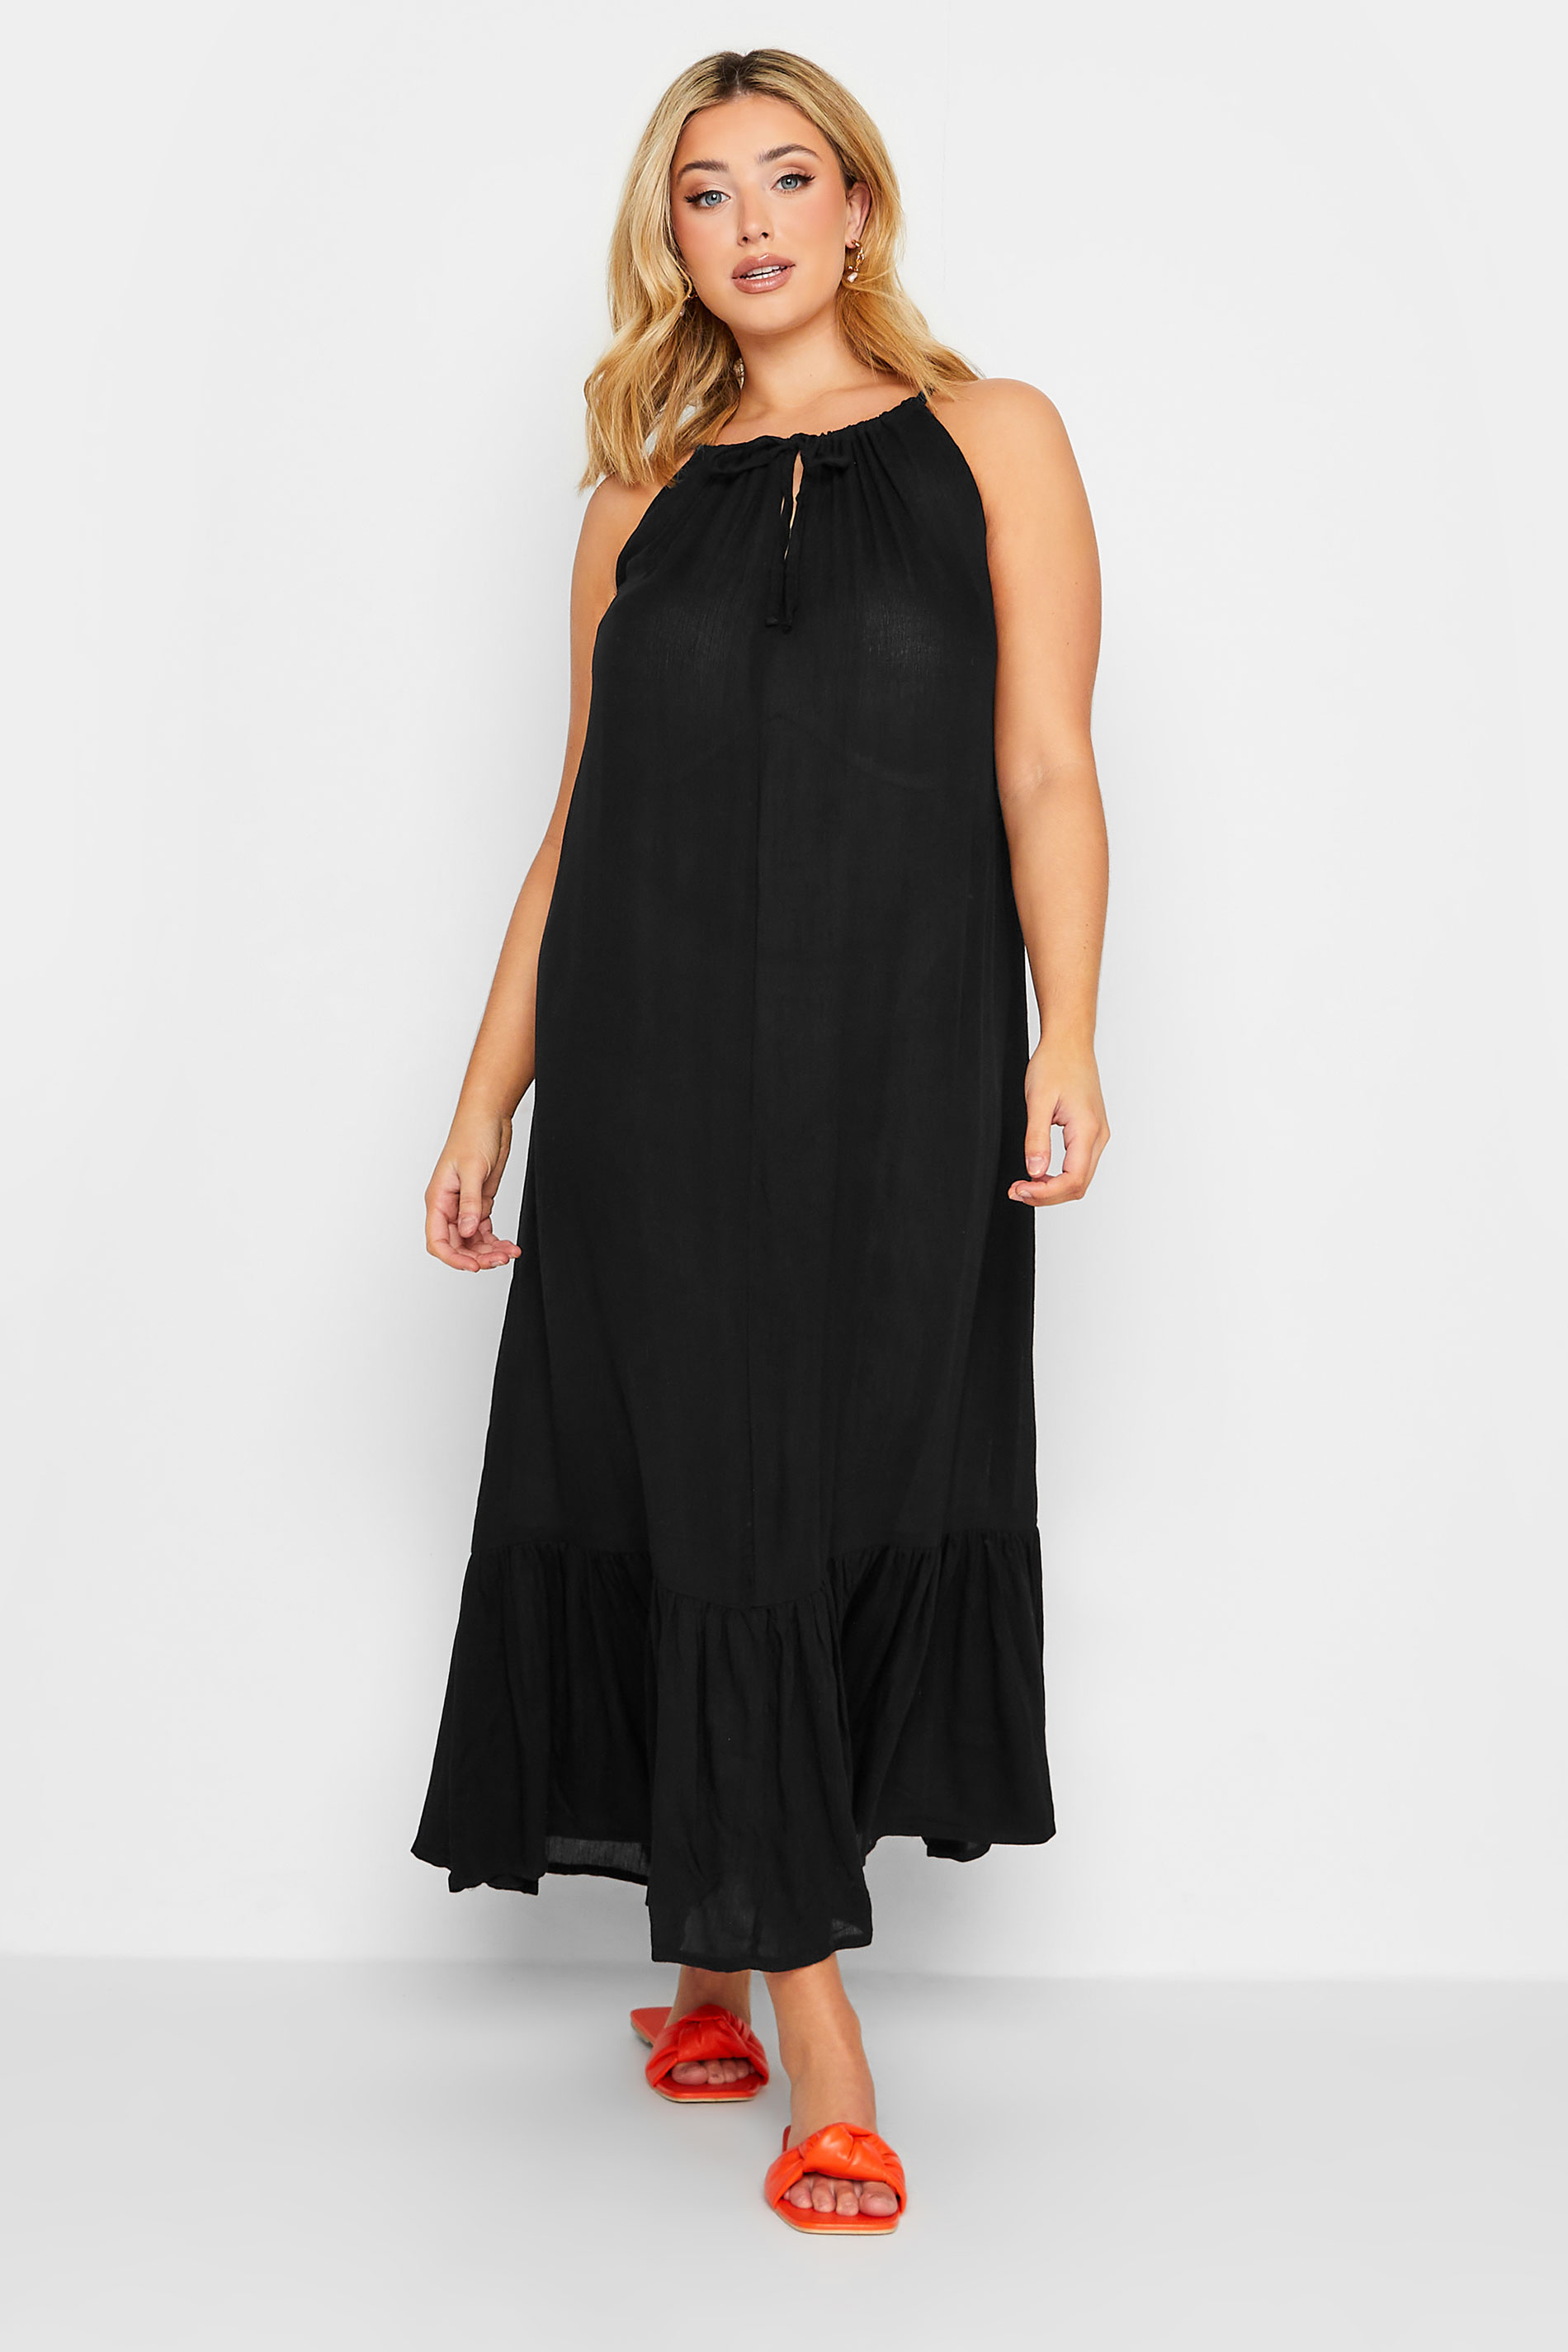 YOURS Curve Plus Size Black Keyhole Tiered Beach Dress | Yours Clothing  1